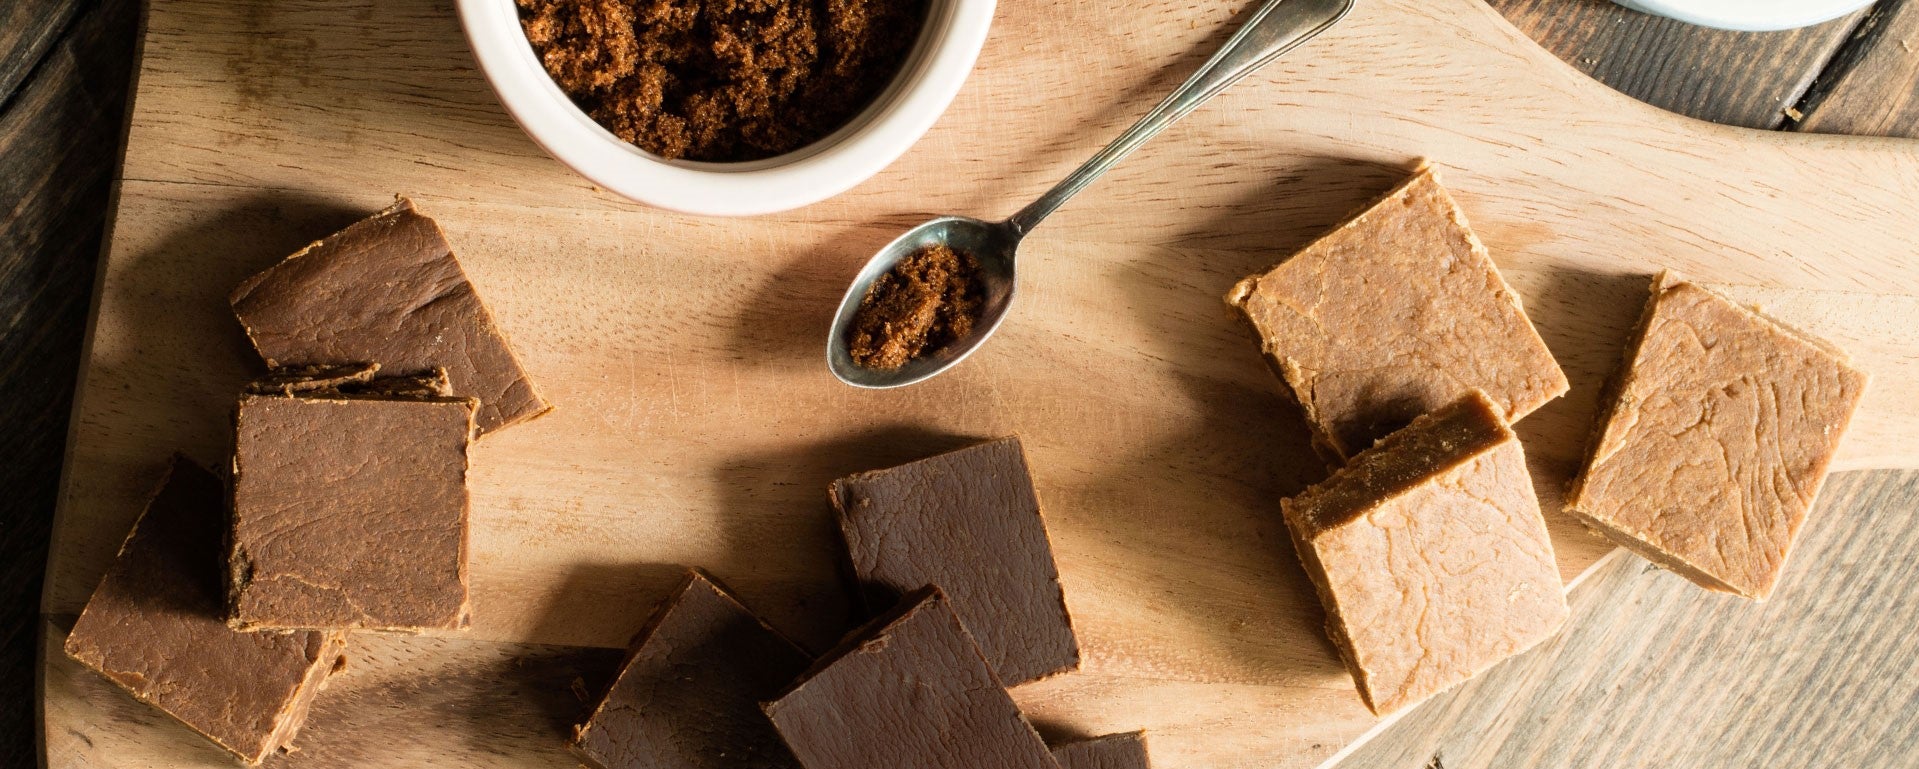 What Sugar Should You Use For Fudge?